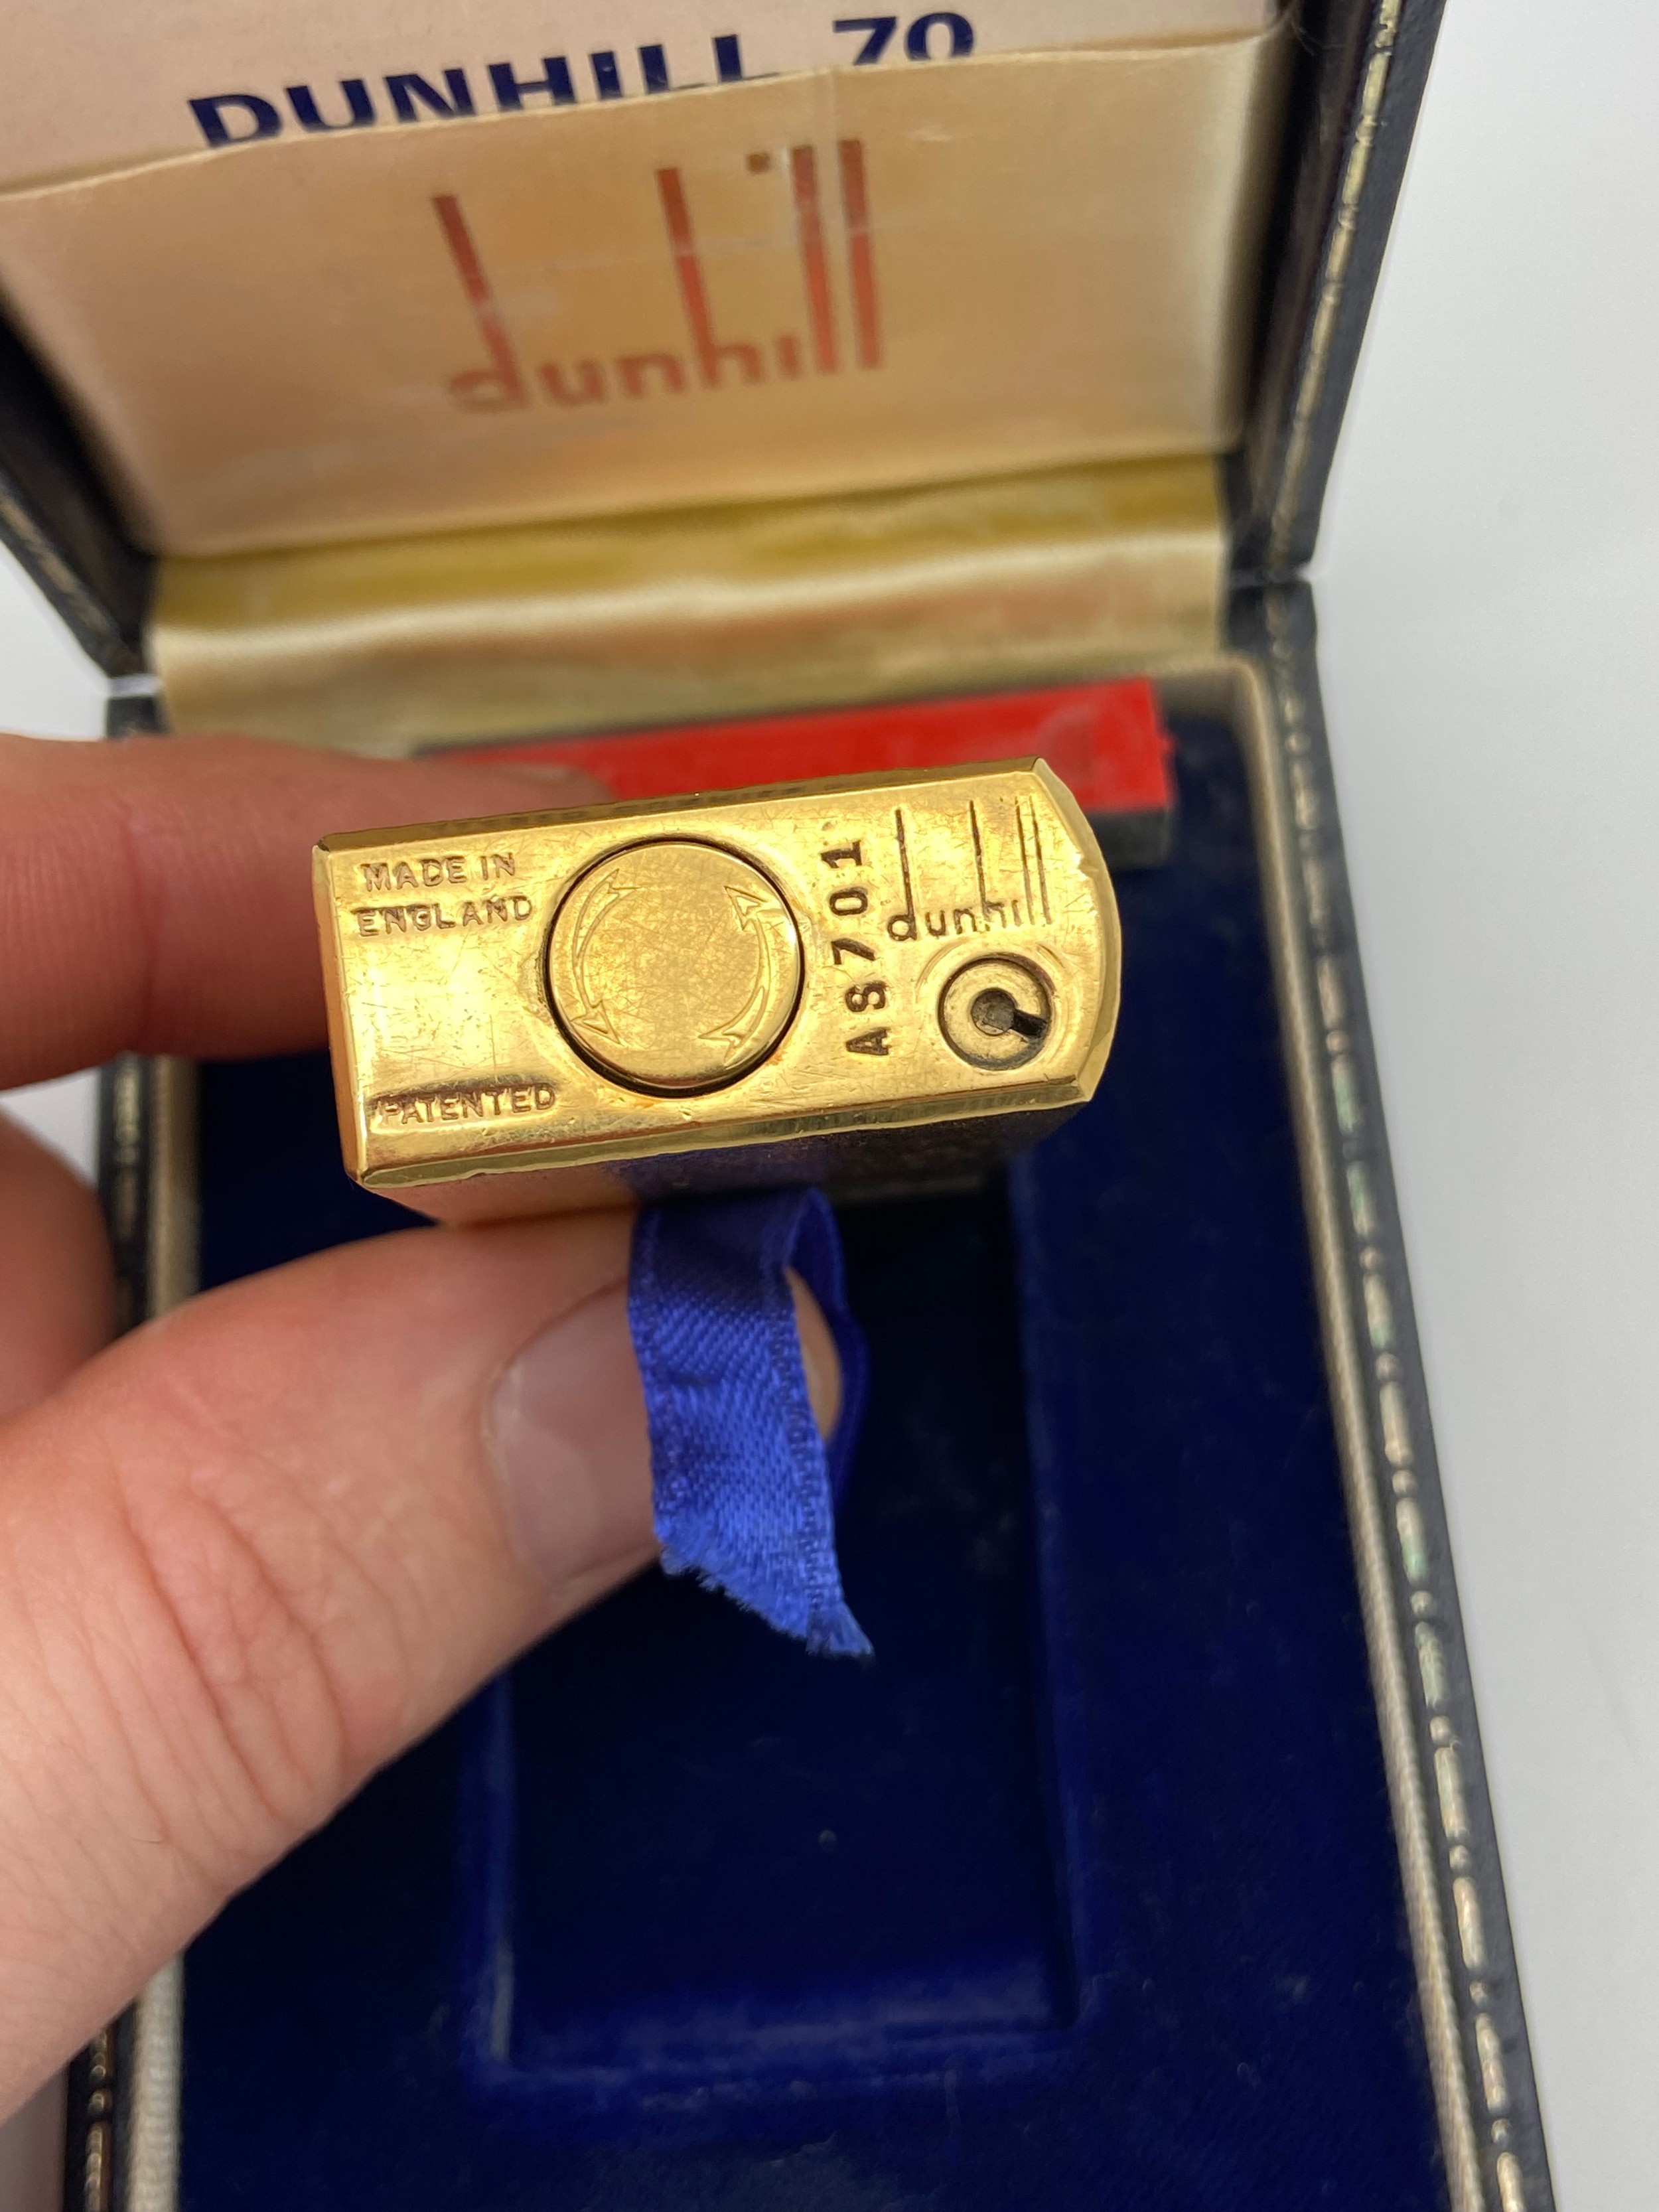 A Vintage Dunhill 70 gold plated lighter, box and instructions - Image 2 of 3